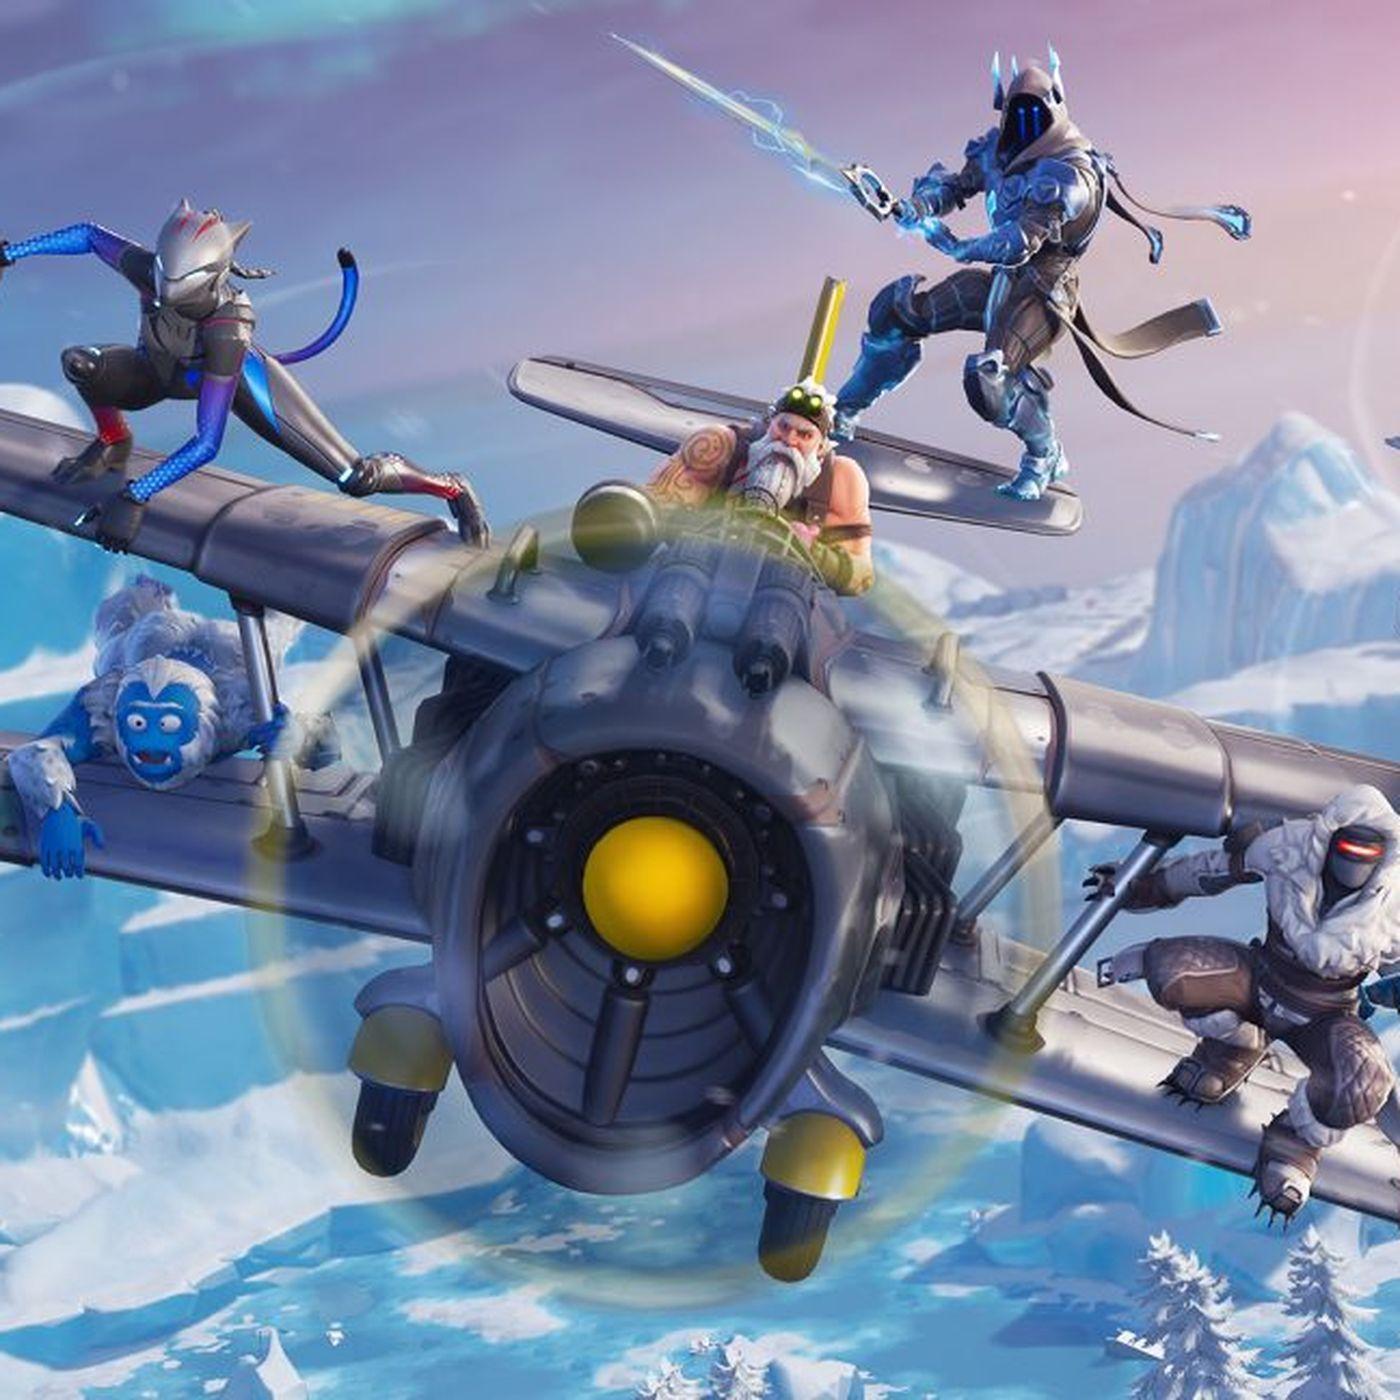 Fortnite season 7 arrives with Santa, planes, and lots of snow